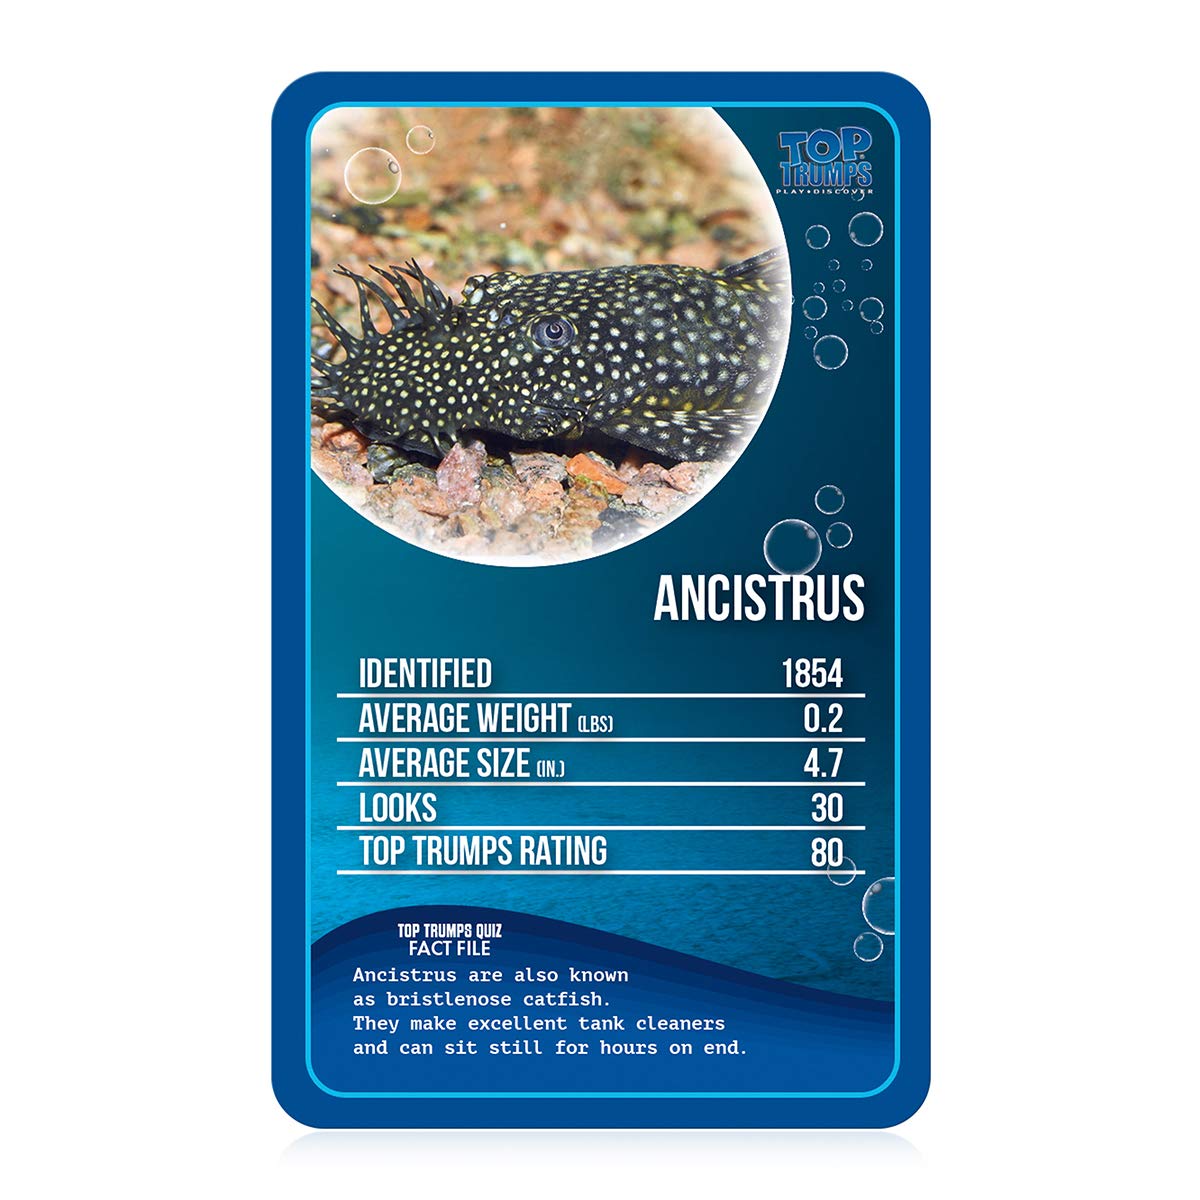 Top Trumps Freshwater Fish Classics Card Game, Learn Facts About The Angelfish, Ancistrus and The Bull Shark in This Educational Packed Game, Gifts and Toys for Boys and Girls Aged 6 Plus